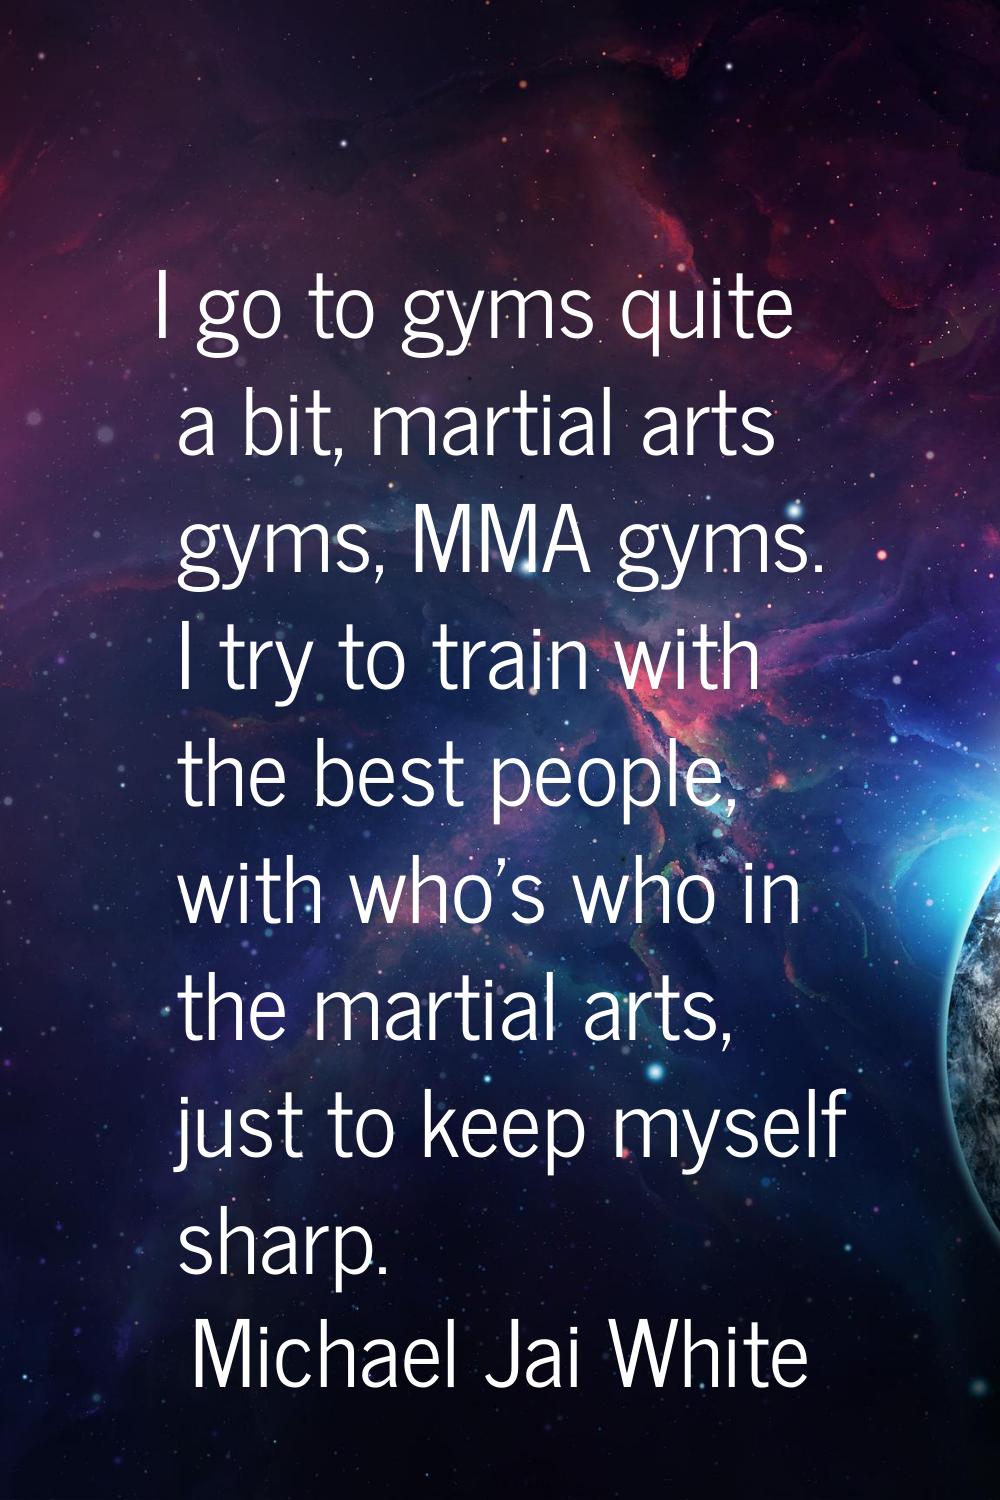 I go to gyms quite a bit, martial arts gyms, MMA gyms. I try to train with the best people, with wh